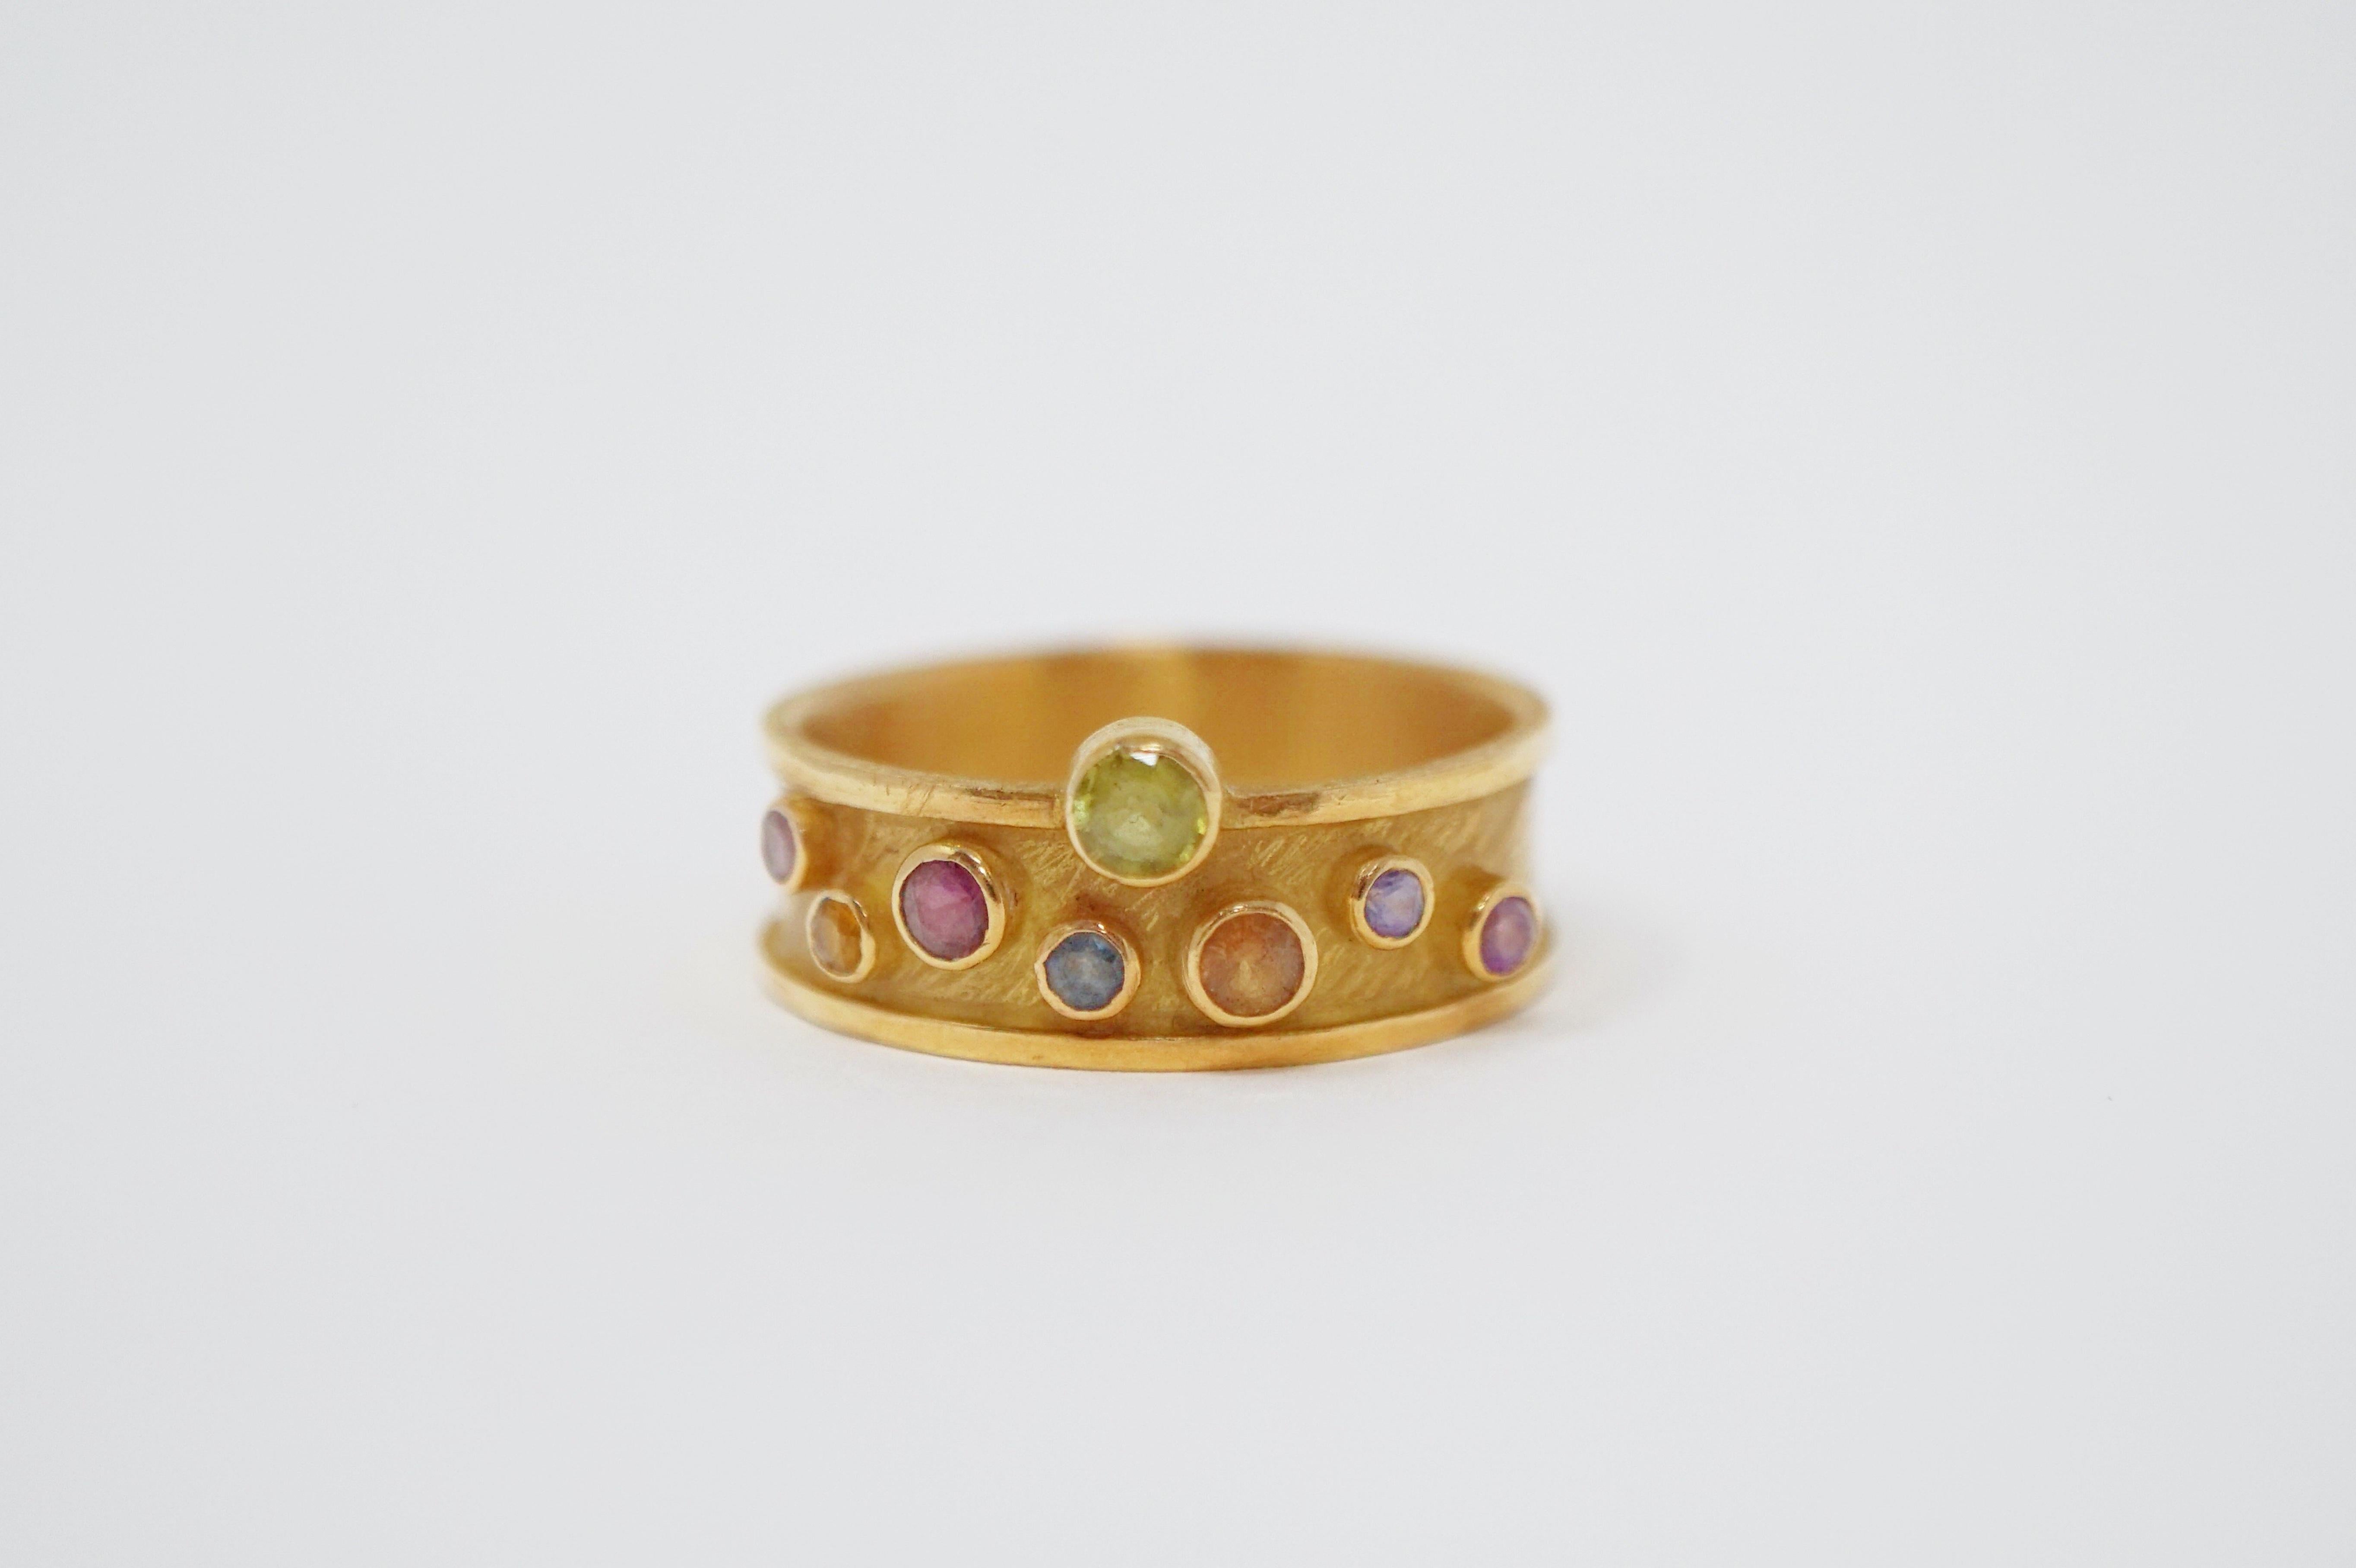 This gorgeous 18 karat yellow gold band ring by Barbara Heinrich is a highly wearable work of art, featuring eight round faceted bezel set sapphires in a rainbow of shades including ruby, amber, cornflower, light green and purple. The textured band